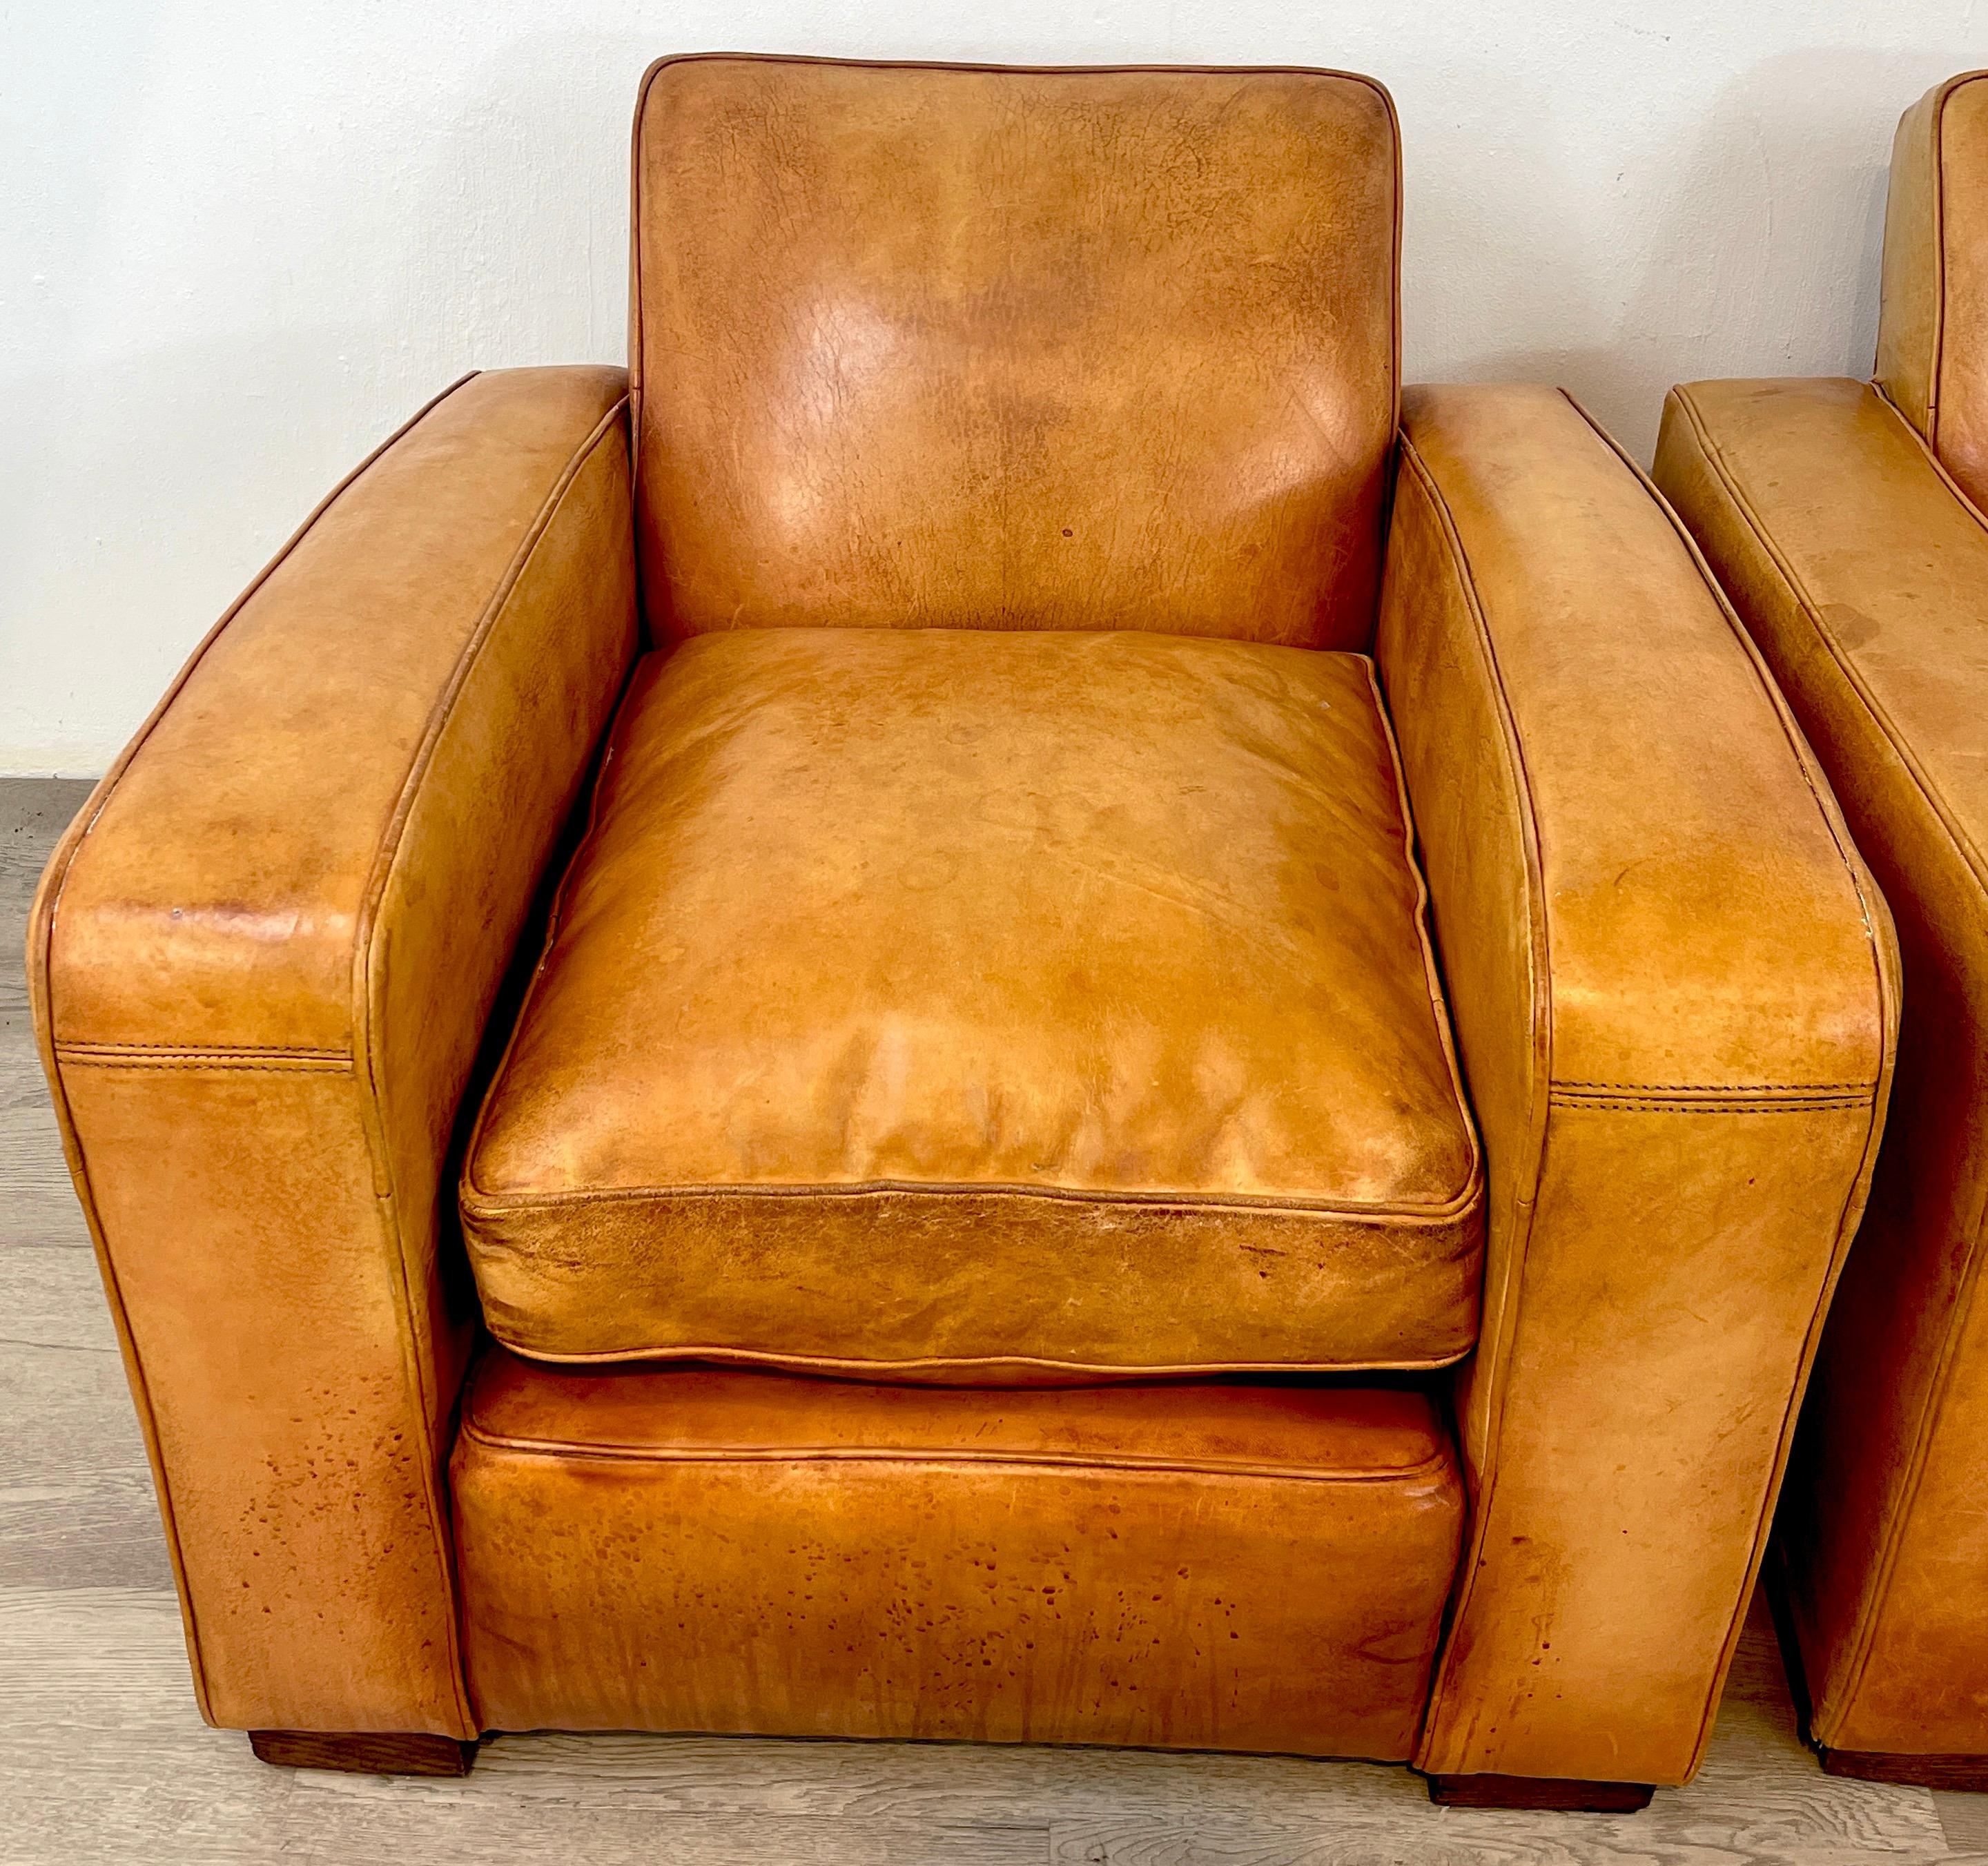 Pair of French Art Deco Leather Club Chairs 1